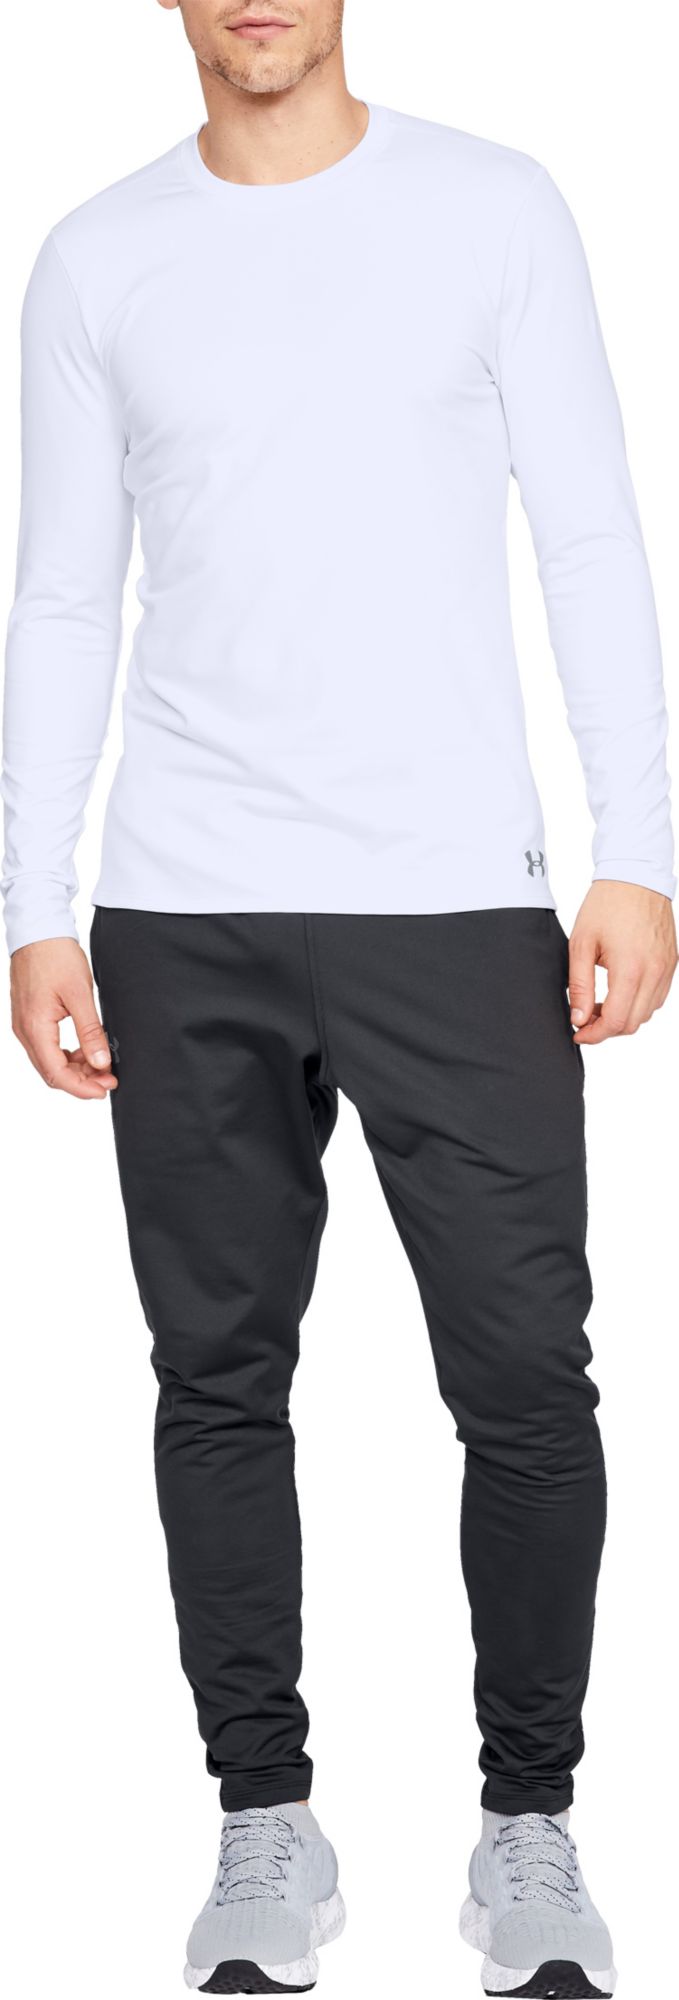 Dick's Sporting Goods Under Armour Men's ColdGear Fitted Crew Long